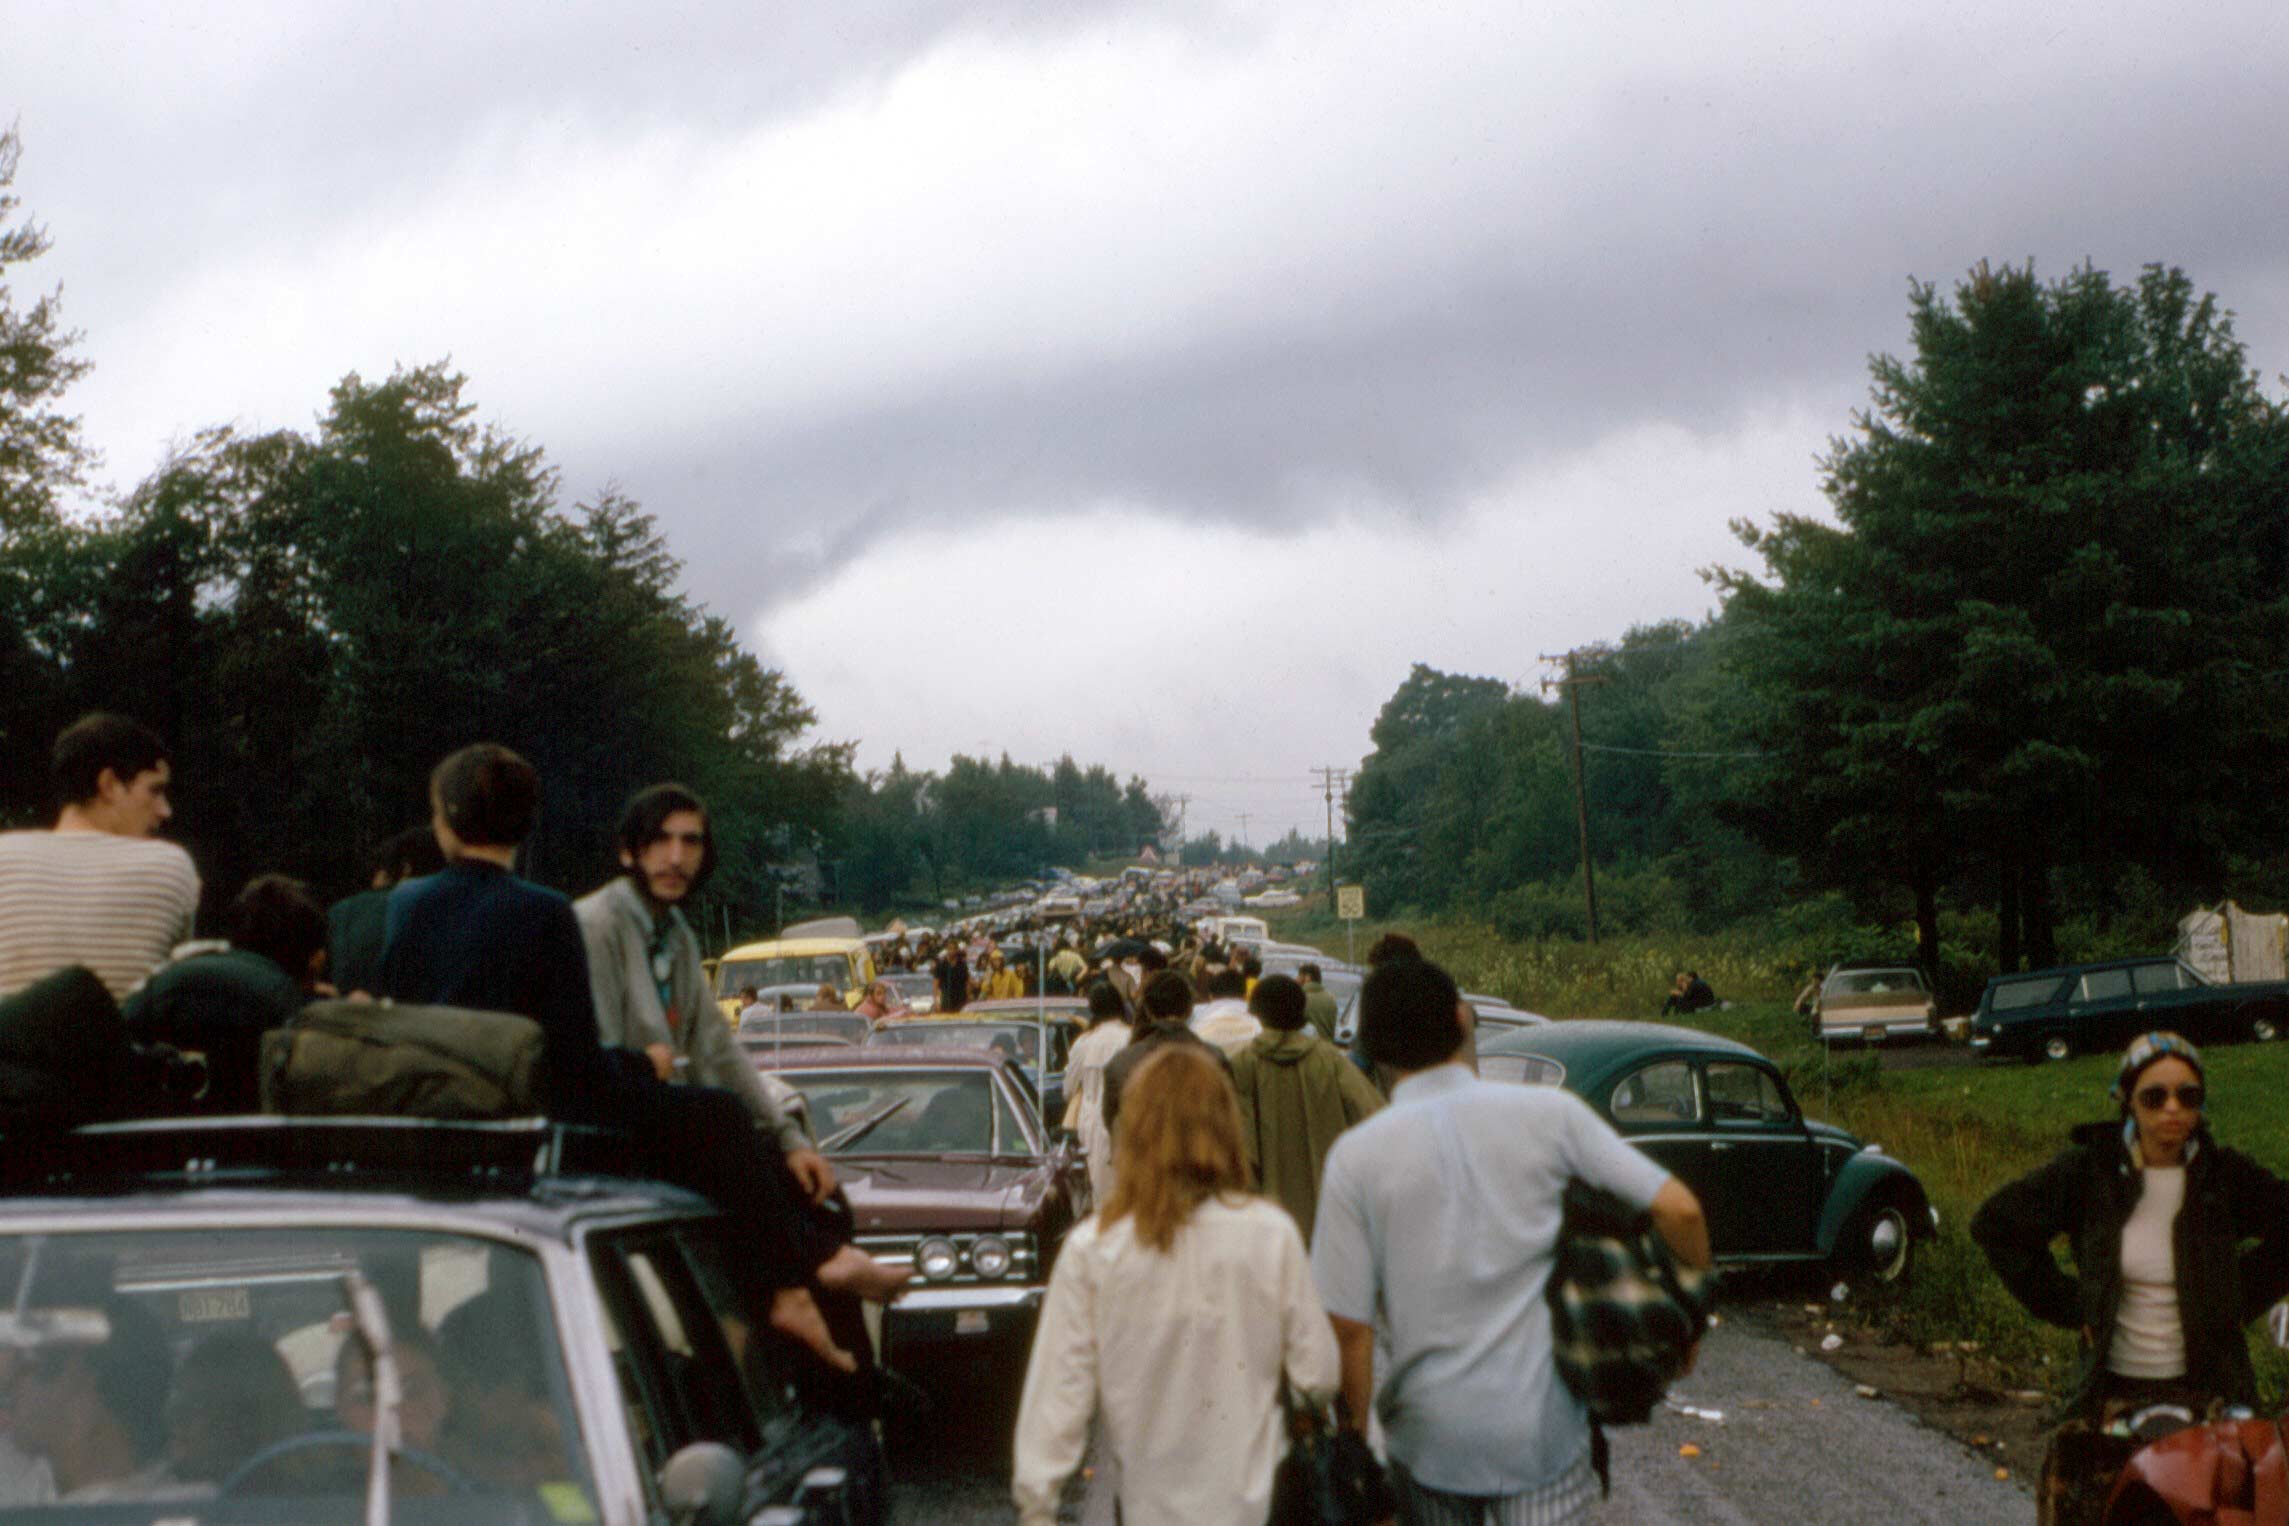 Line of traffic with people walking on the road going to woodstock